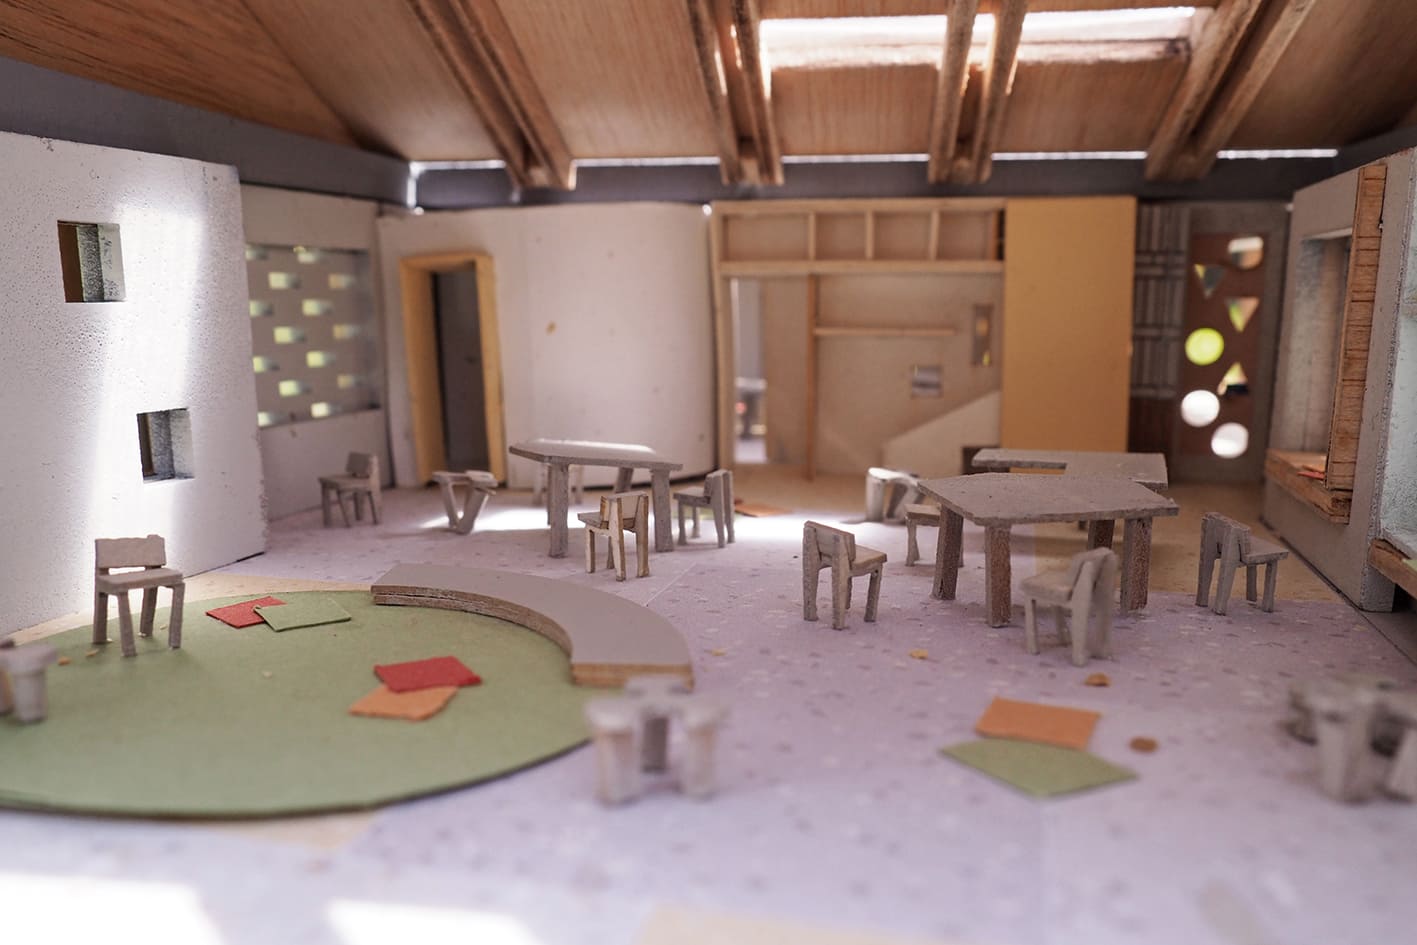 Colegio Andino Classroom interior model imagining and warm and stimulant atmosphere through materiality textures and colors Hs2e 2019